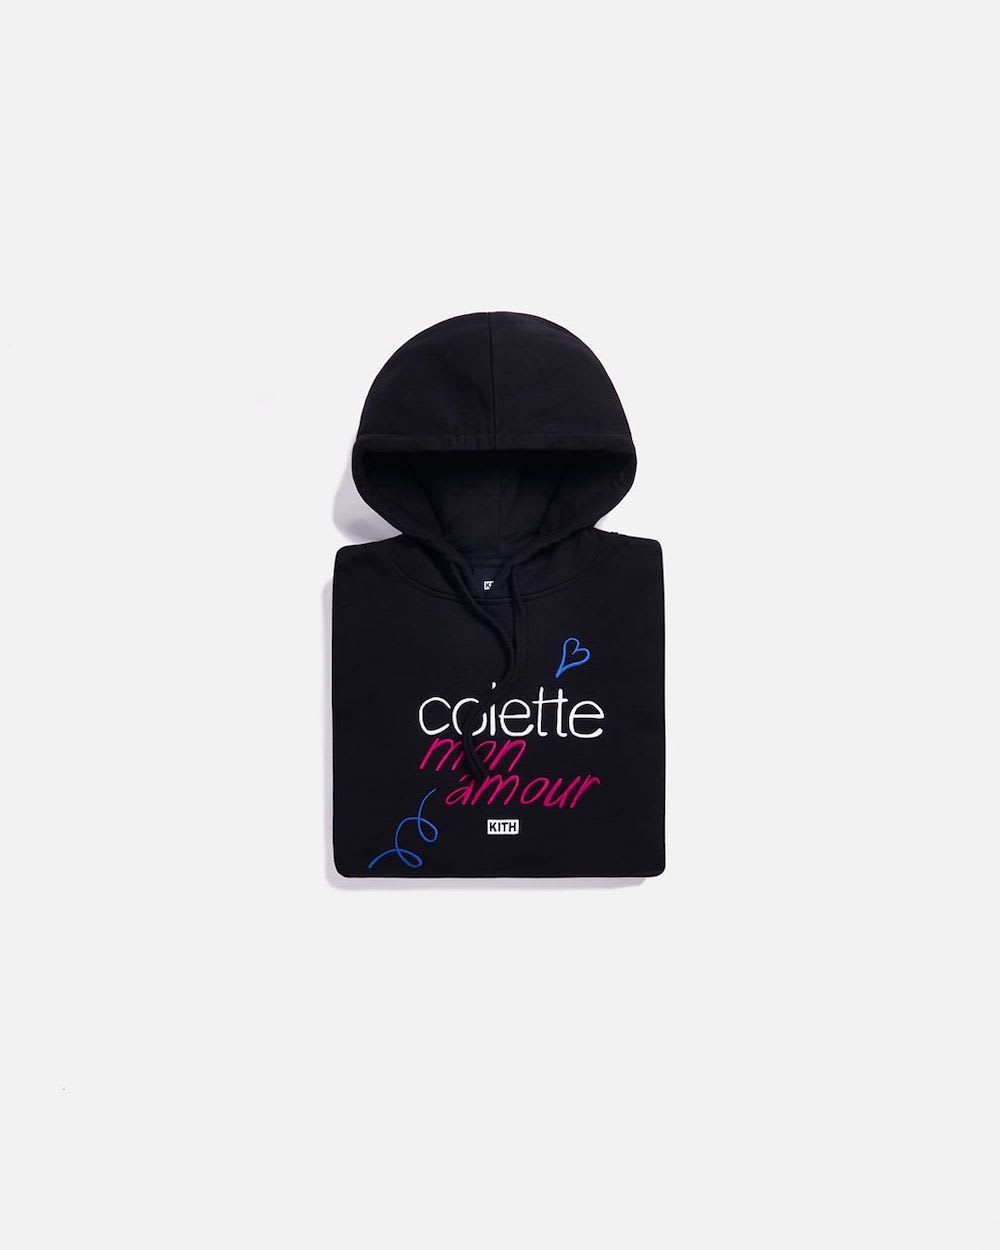 Complex Best Style Releases Kith Ronnie Fieg Colette Mon Amour Hoodie